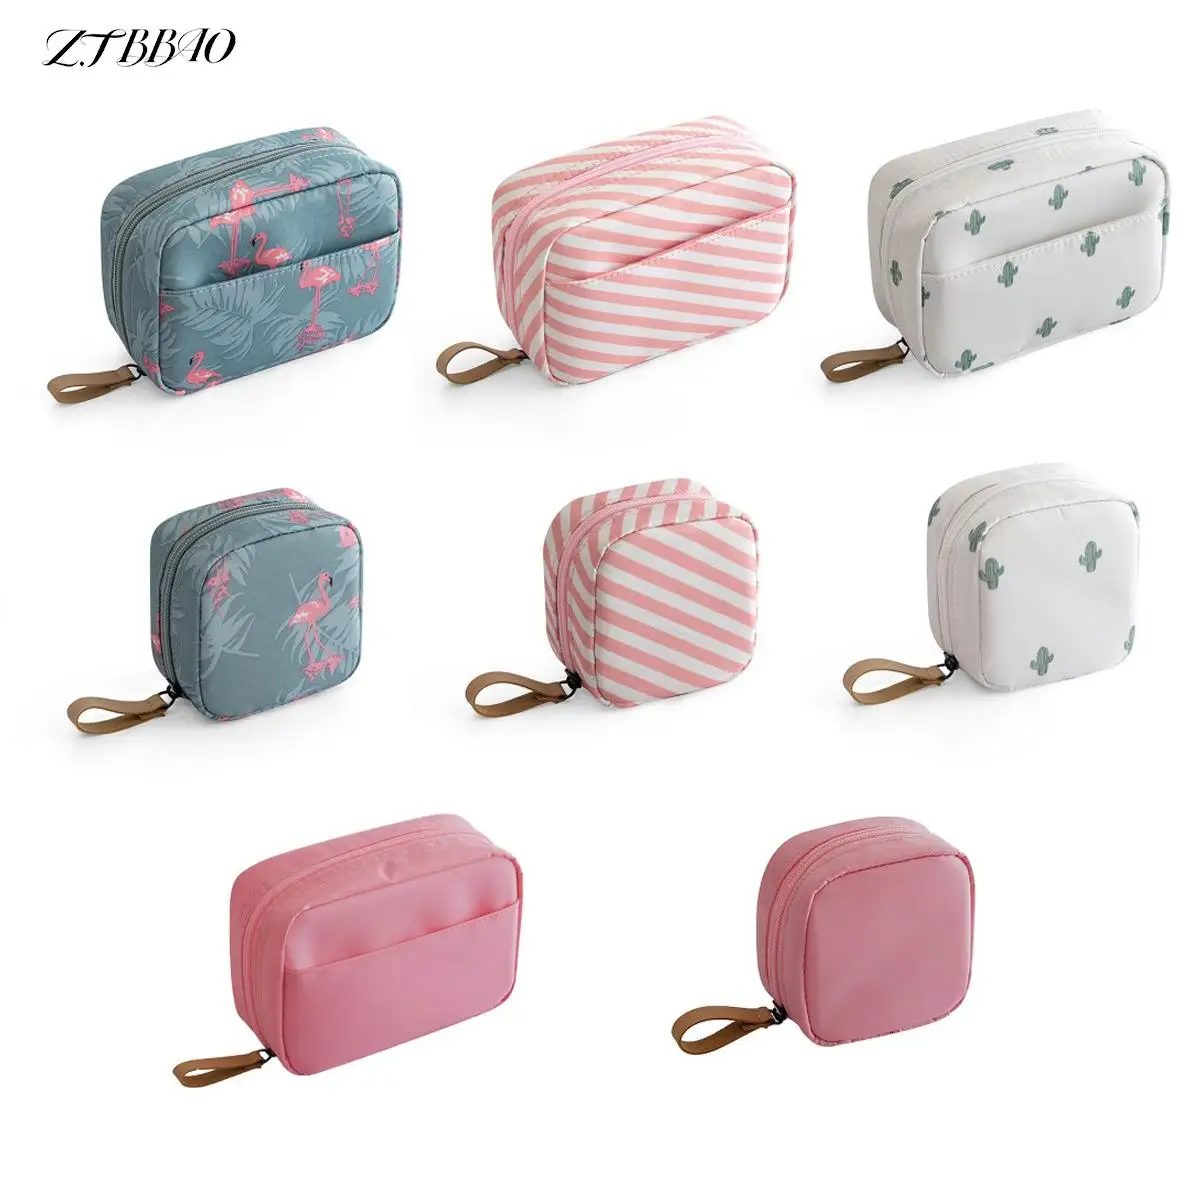 

Mini Cosmetic Bag Flamingo Solid Color Travel Toiletry Storage Bag Cactus Beauty Makeup Bag Cosmetic Bag Organizer Special Offer